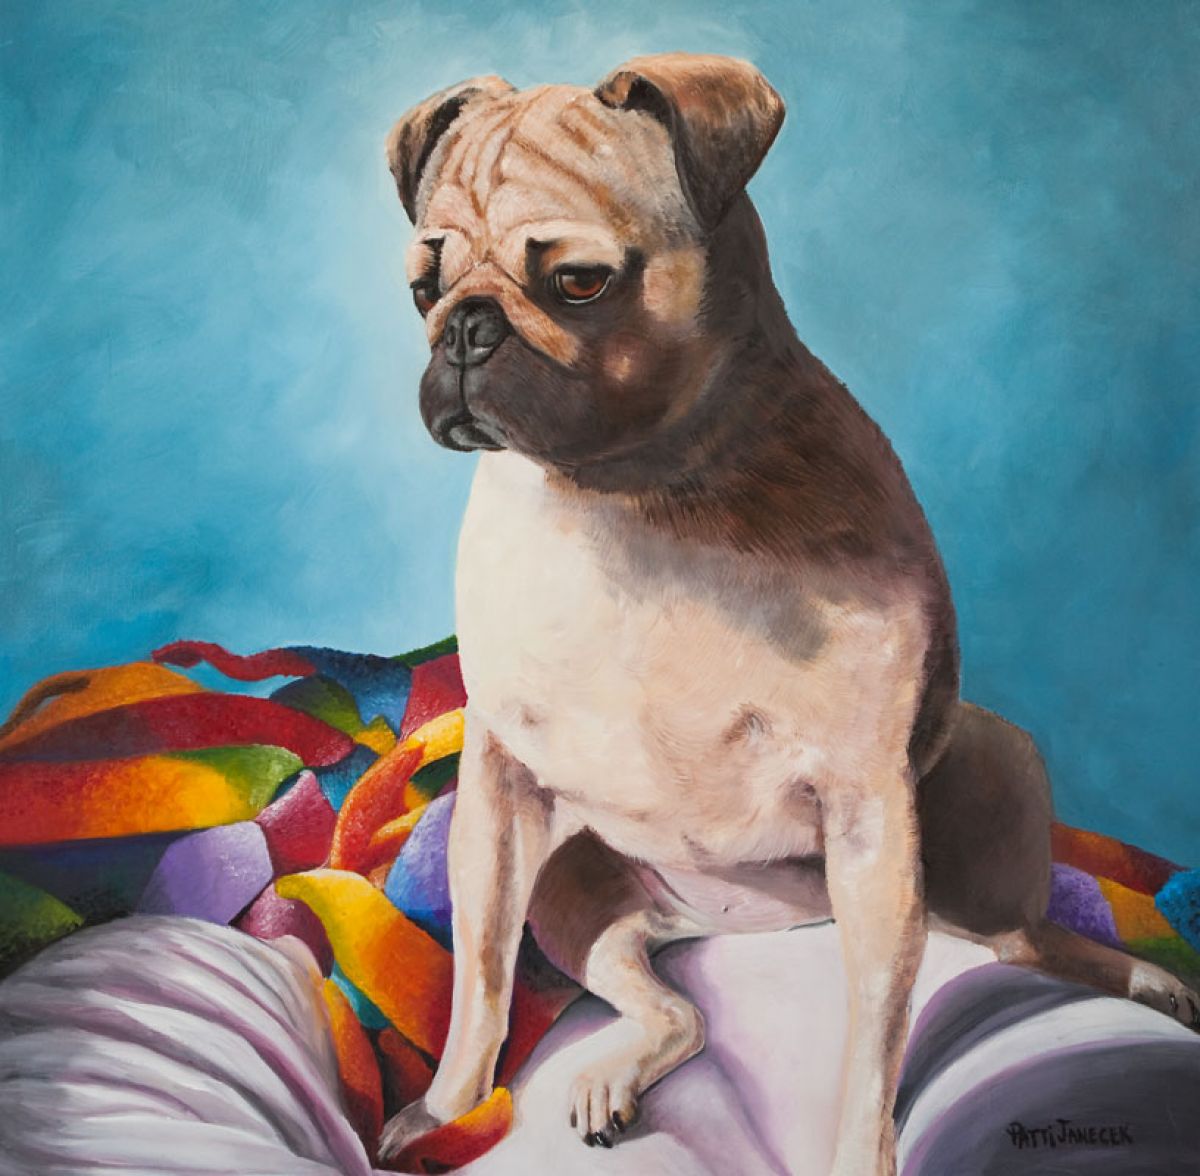 2010, Oil on Canvas, 30 x 30 in.